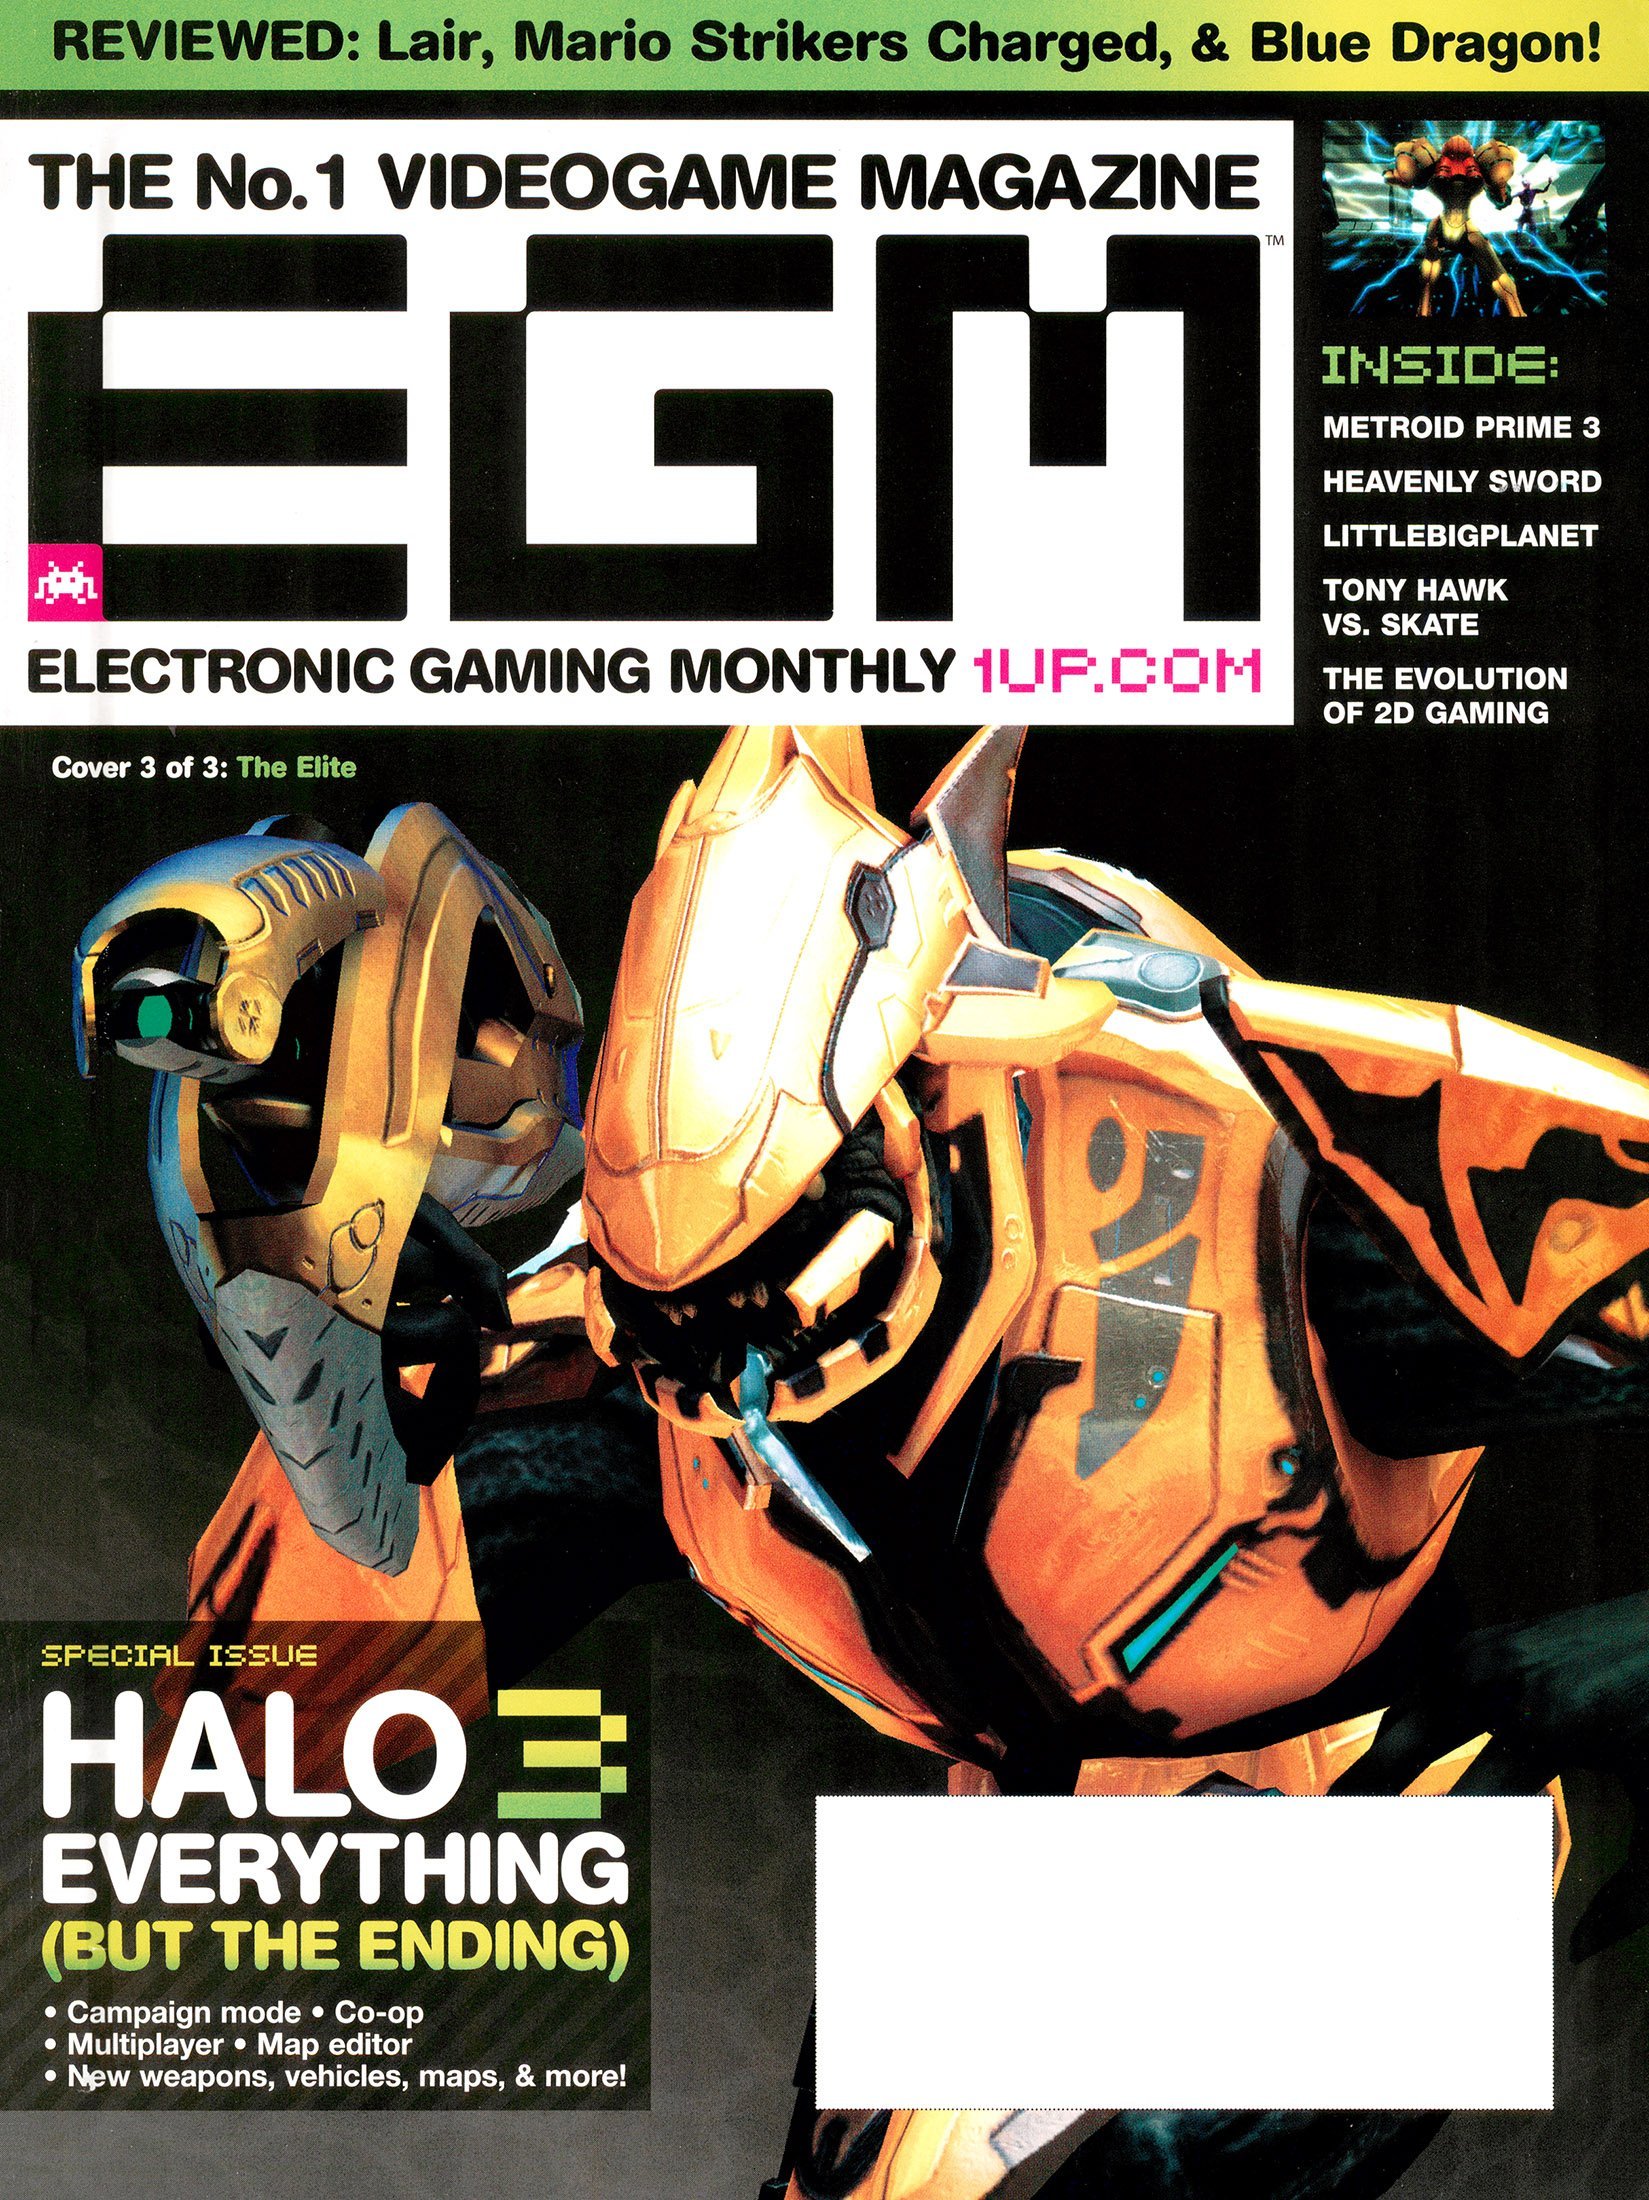 Electronic Gaming Monthly Issue 219 (September 2007) Cover 3